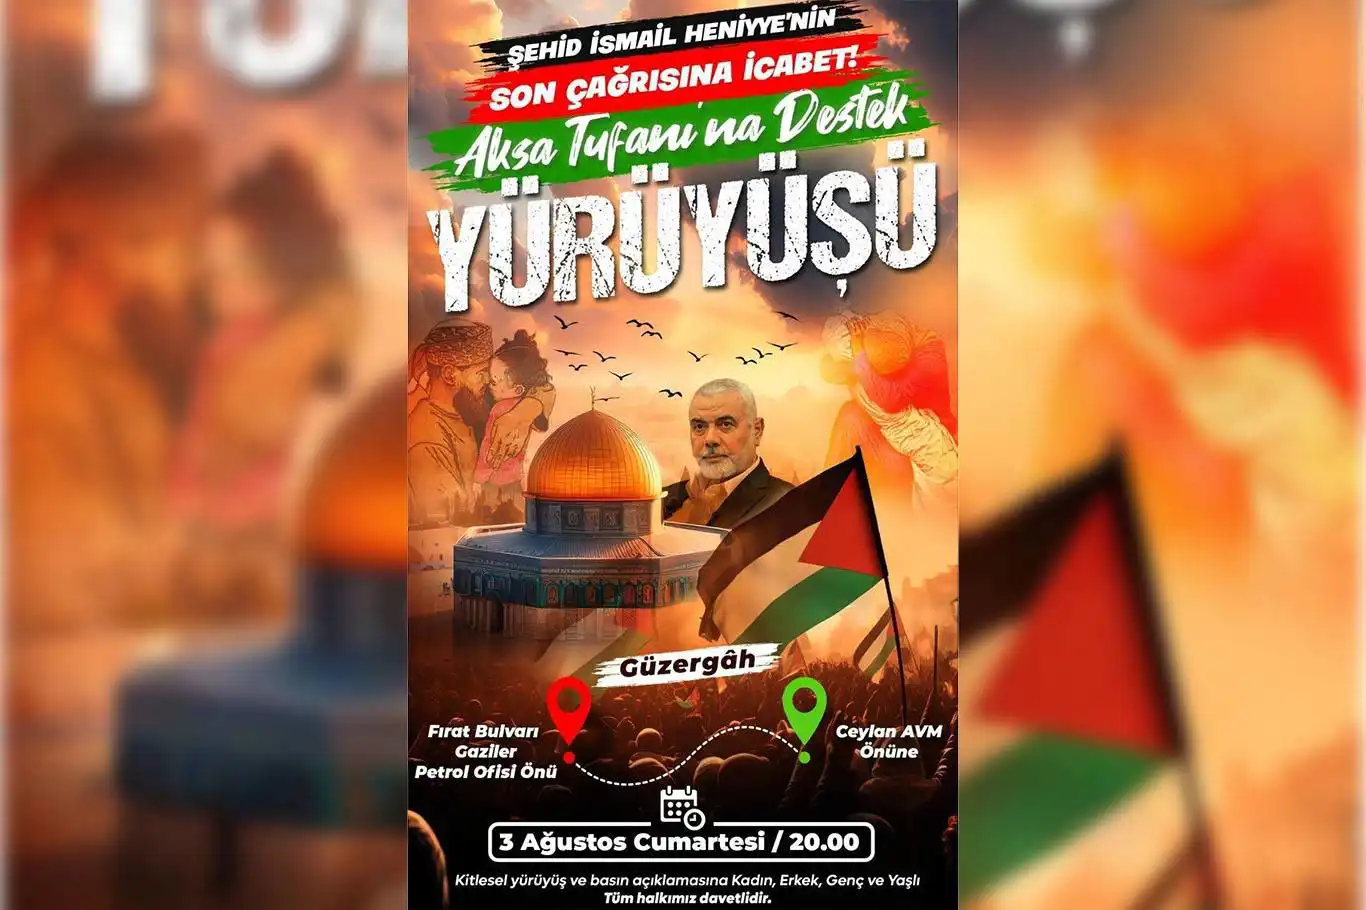 Diyarbakır to host march in support of Gaza following Ismail Haniyeh’s assassination